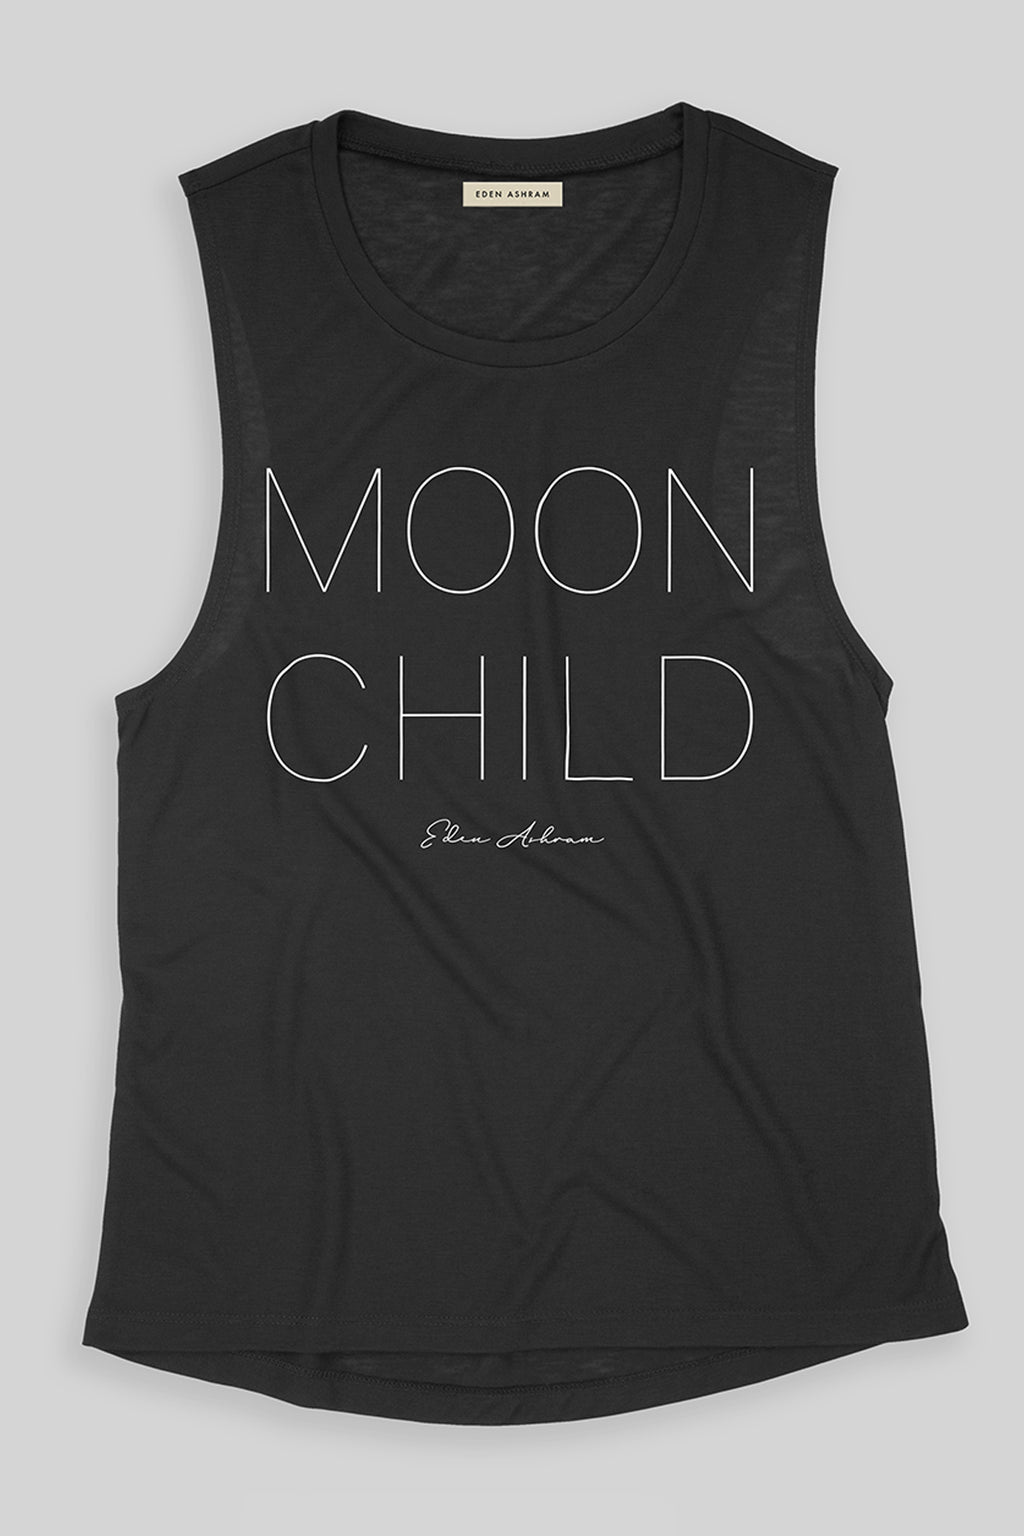 Moon Child Super Soft Muscle Tank